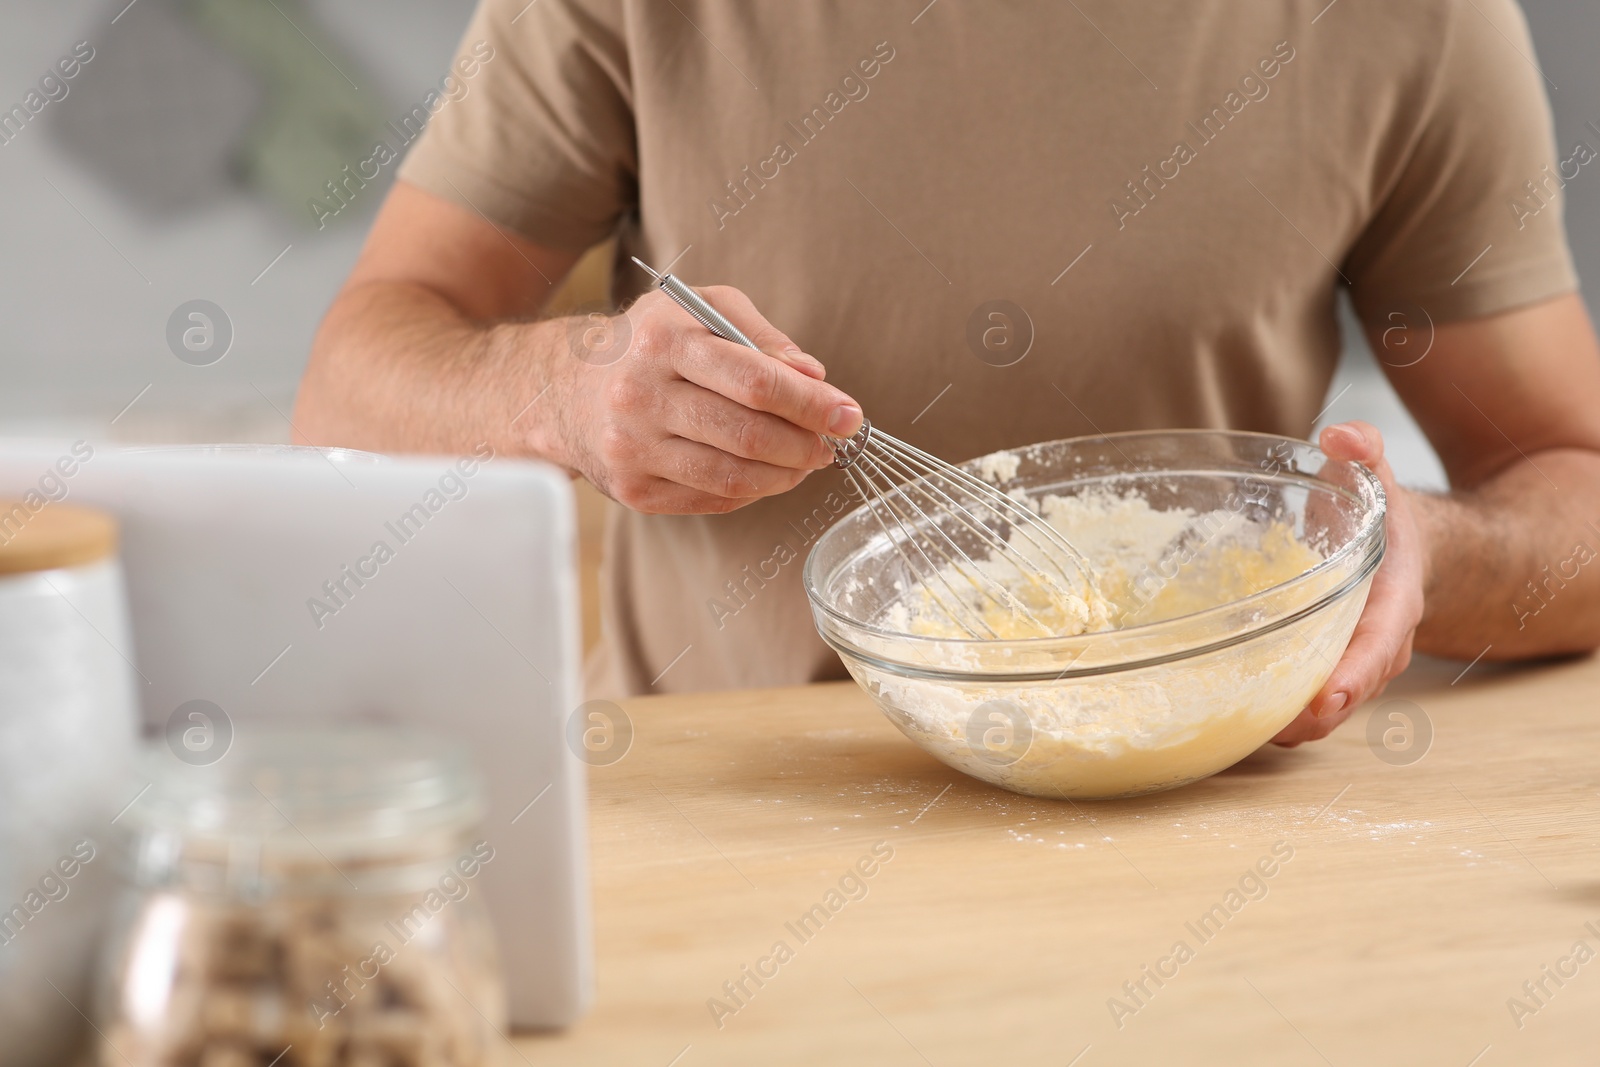 Photo of Man making dough while watching online cooking course via tablet in kitchen, closeup